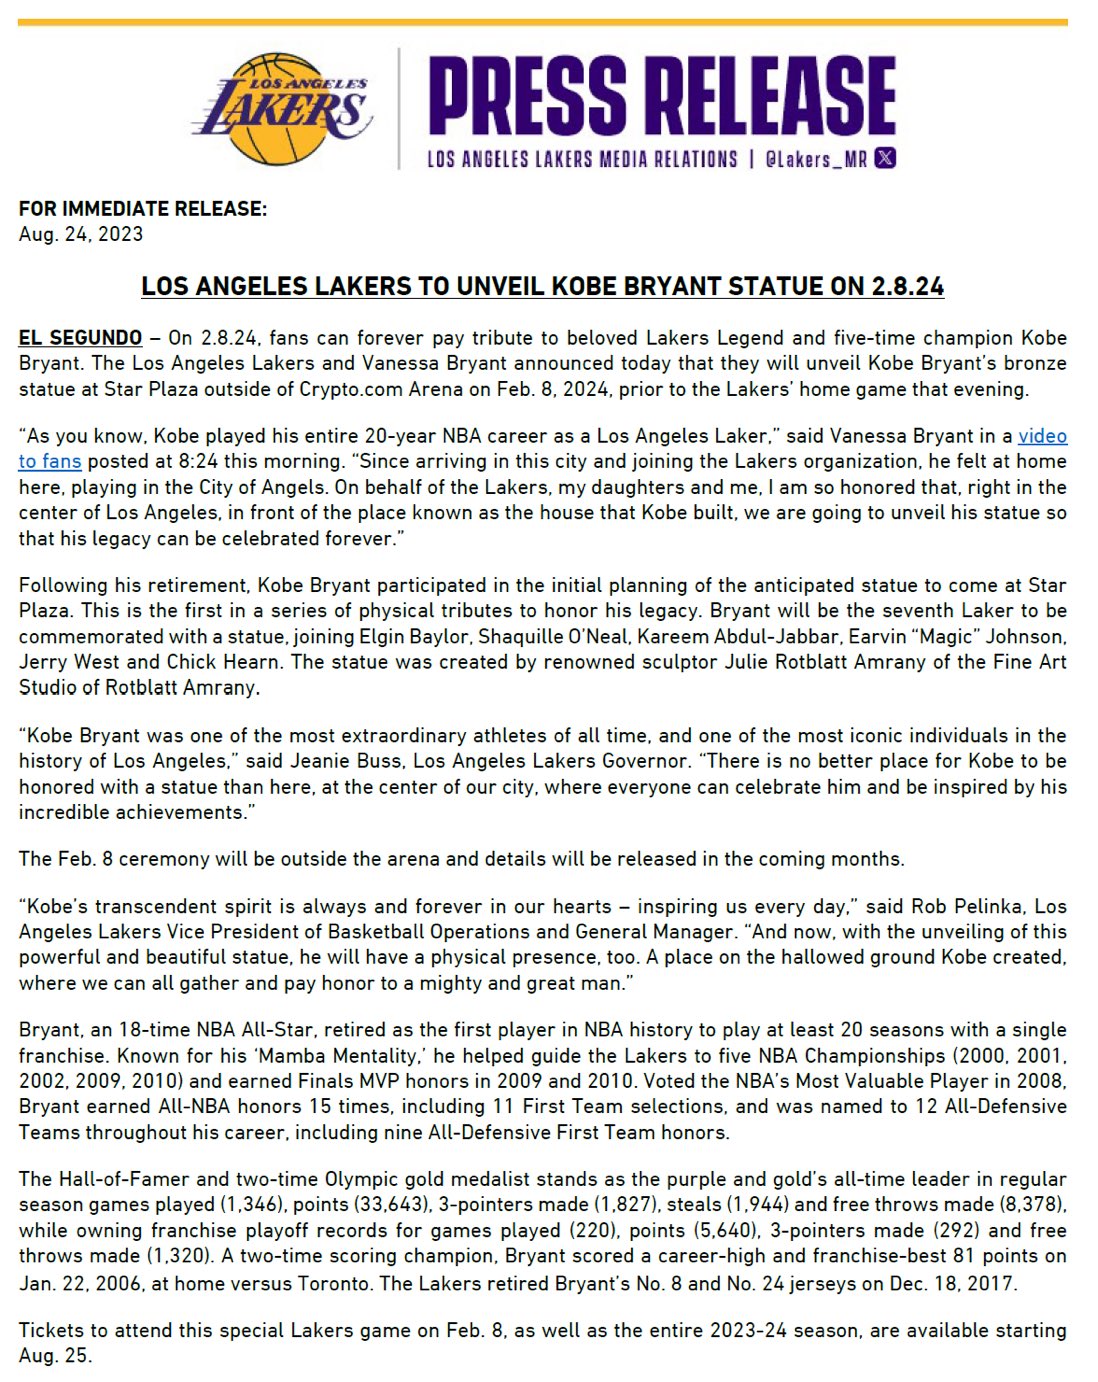 Lakers tickets 2023 - 2024, Los Angeles